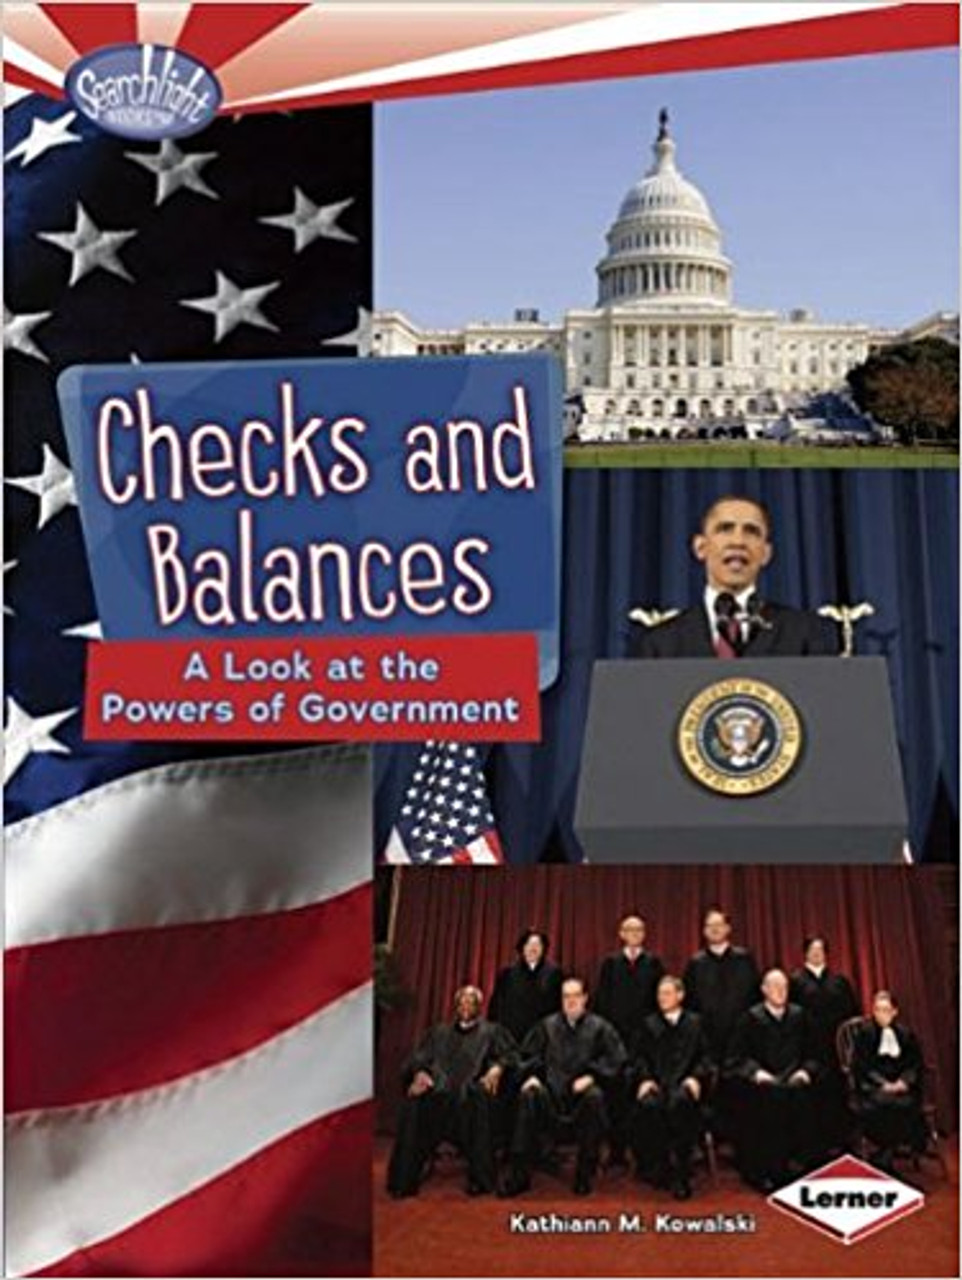 Checks and Balances: A Look at the Powers of Government by Kathiann M Kowalski